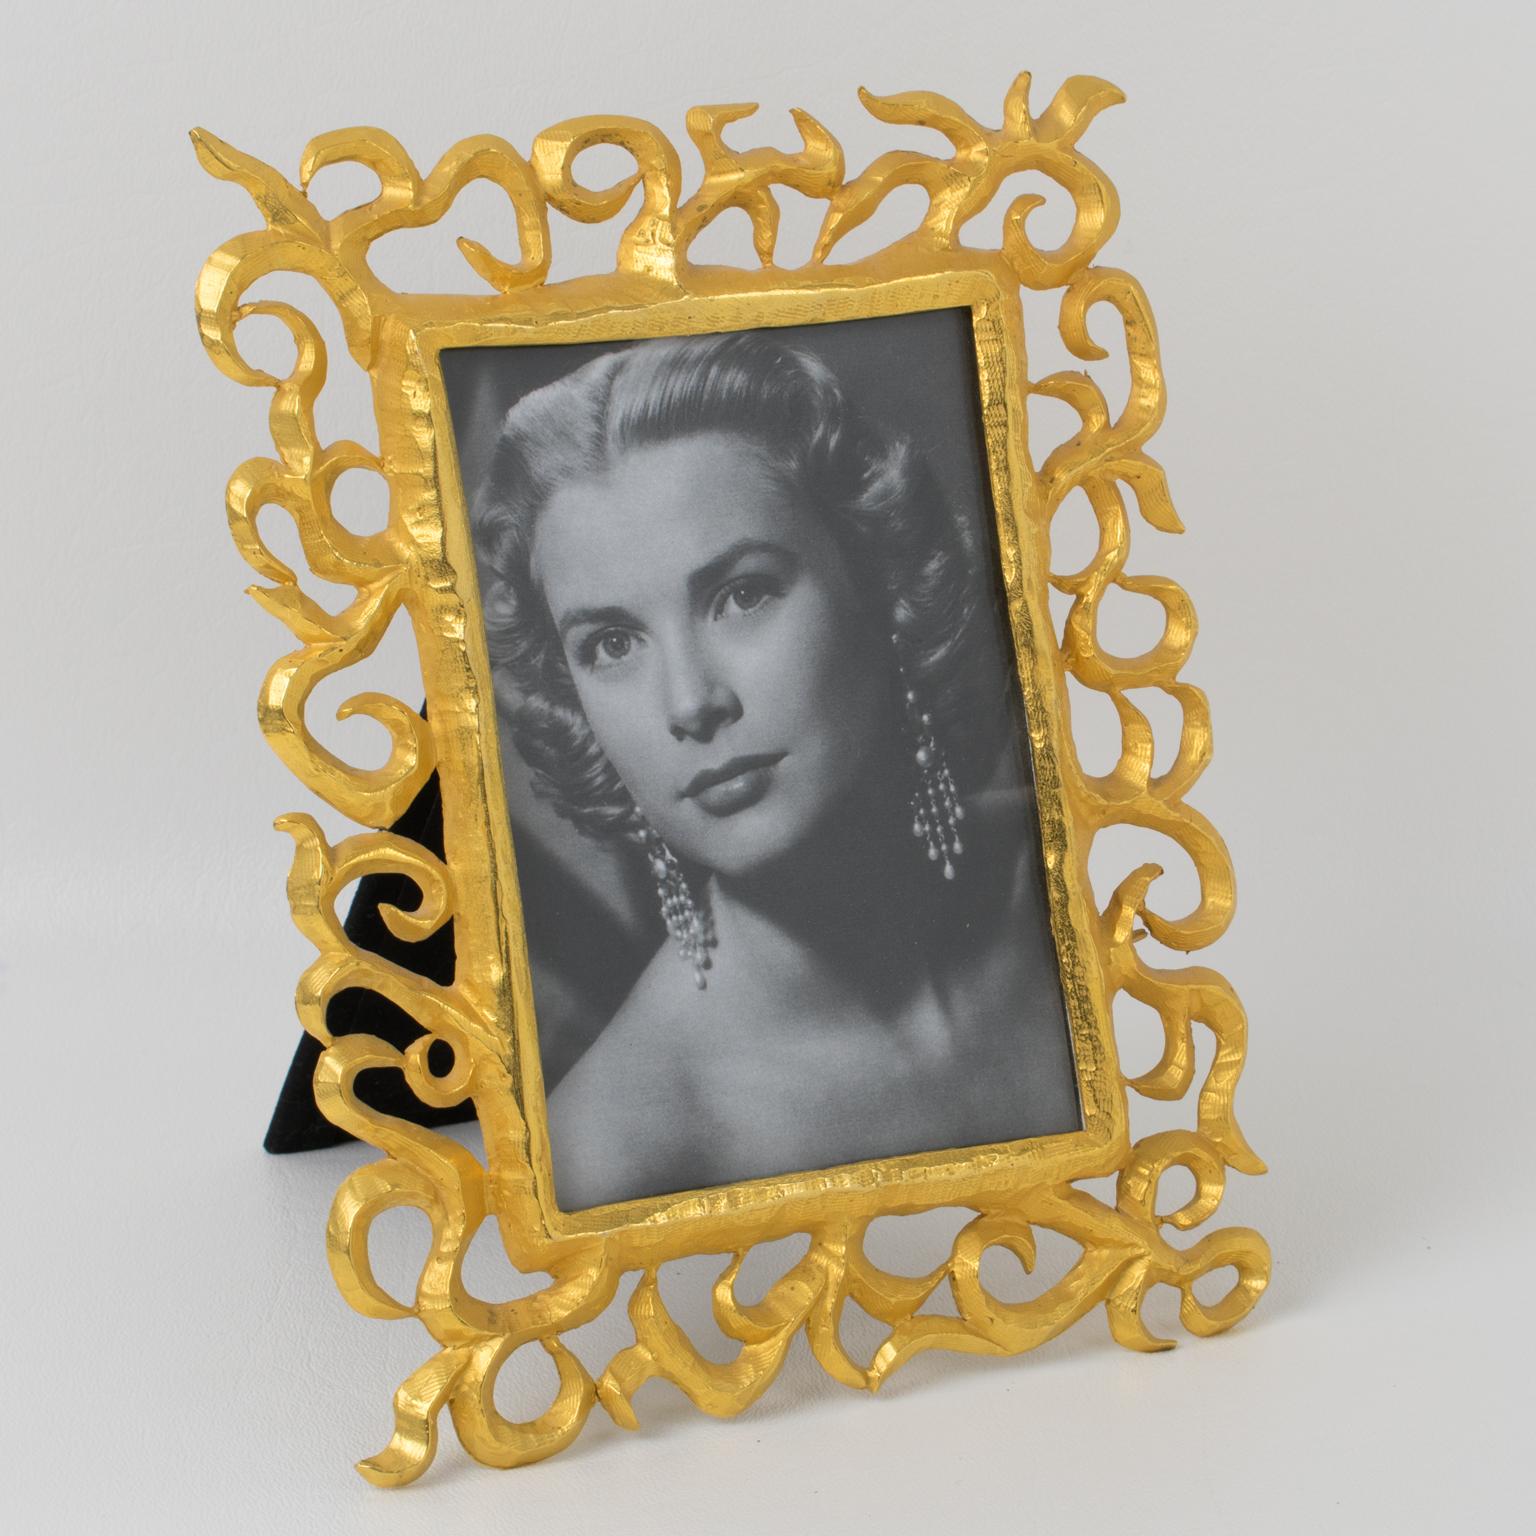 Elegant gilt metal picture photo frame by French designer Edouard Rambaud. Dimensional shape in brushed gilt metal with carving and see-thru detailing. Back and easel in black velvet. Signed underside with 